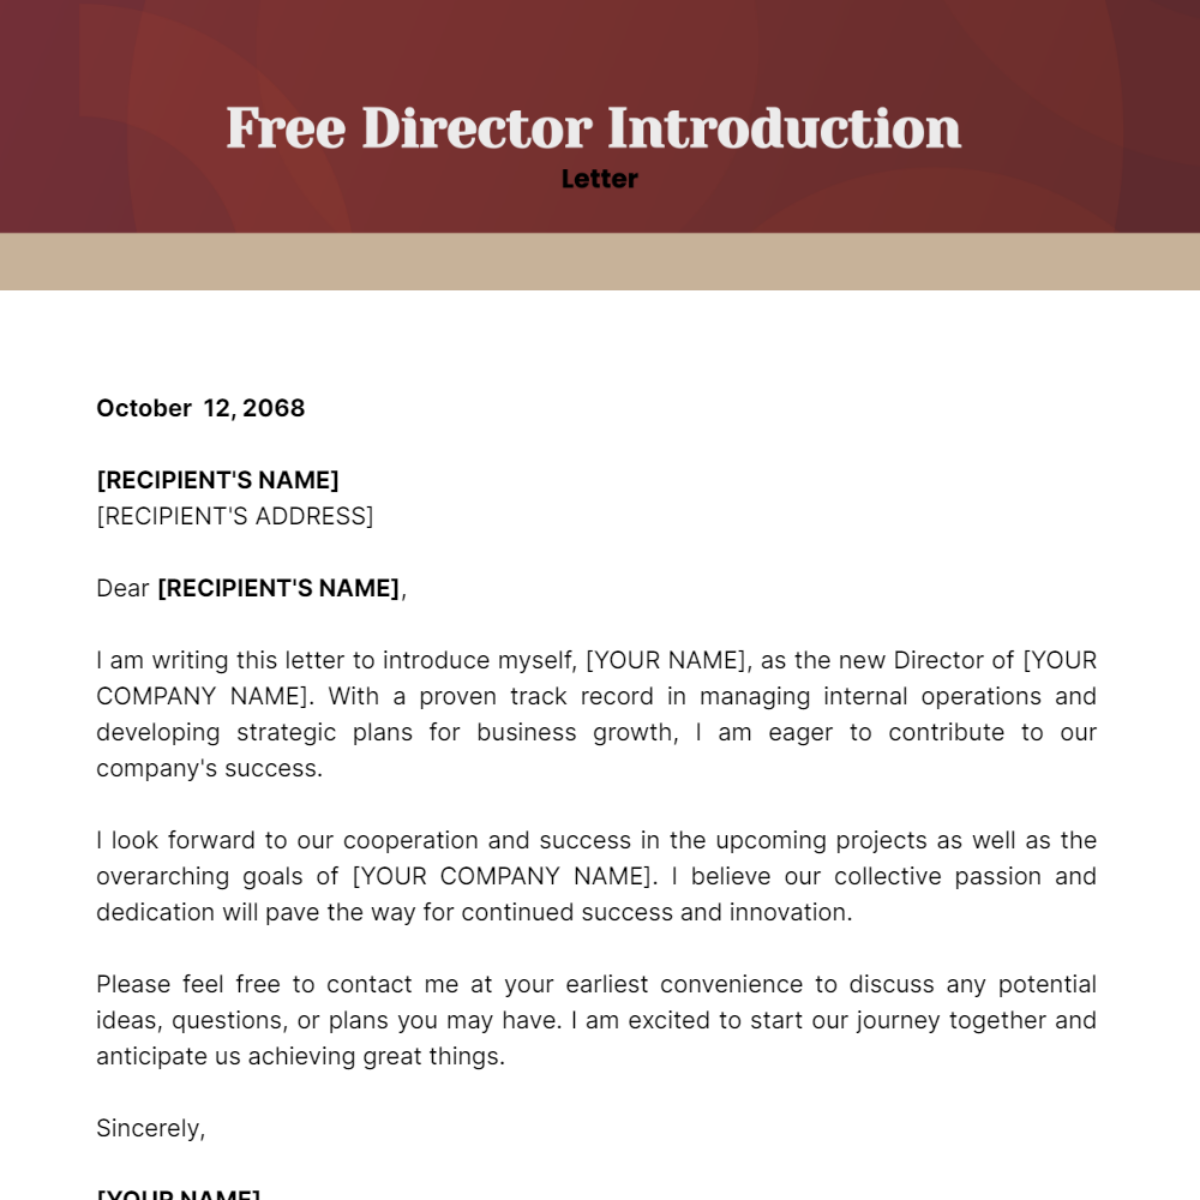 Director Introduction Letter Template